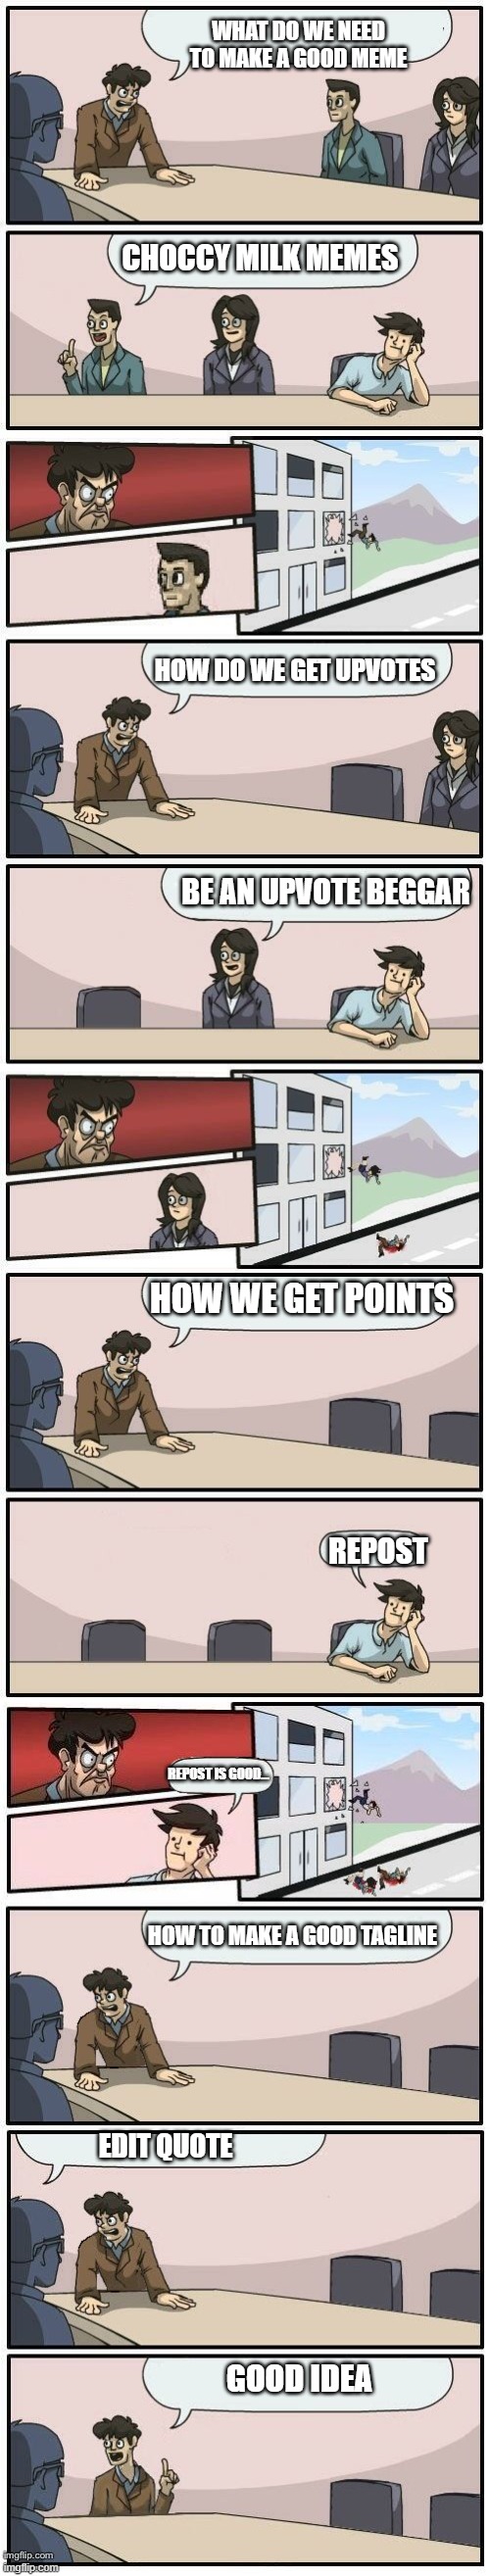 Boardroom Meeting Suggestions Extended | WHAT DO WE NEED TO MAKE A GOOD MEME; CHOCCY MILK MEMES; HOW DO WE GET UPVOTES; BE AN UPVOTE BEGGAR; HOW WE GET POINTS; REPOST; REPOST IS GOOD... HOW TO MAKE A GOOD TAGLINE; EDIT QUOTE; GOOD IDEA | image tagged in boardroom meeting suggestions extended | made w/ Imgflip meme maker